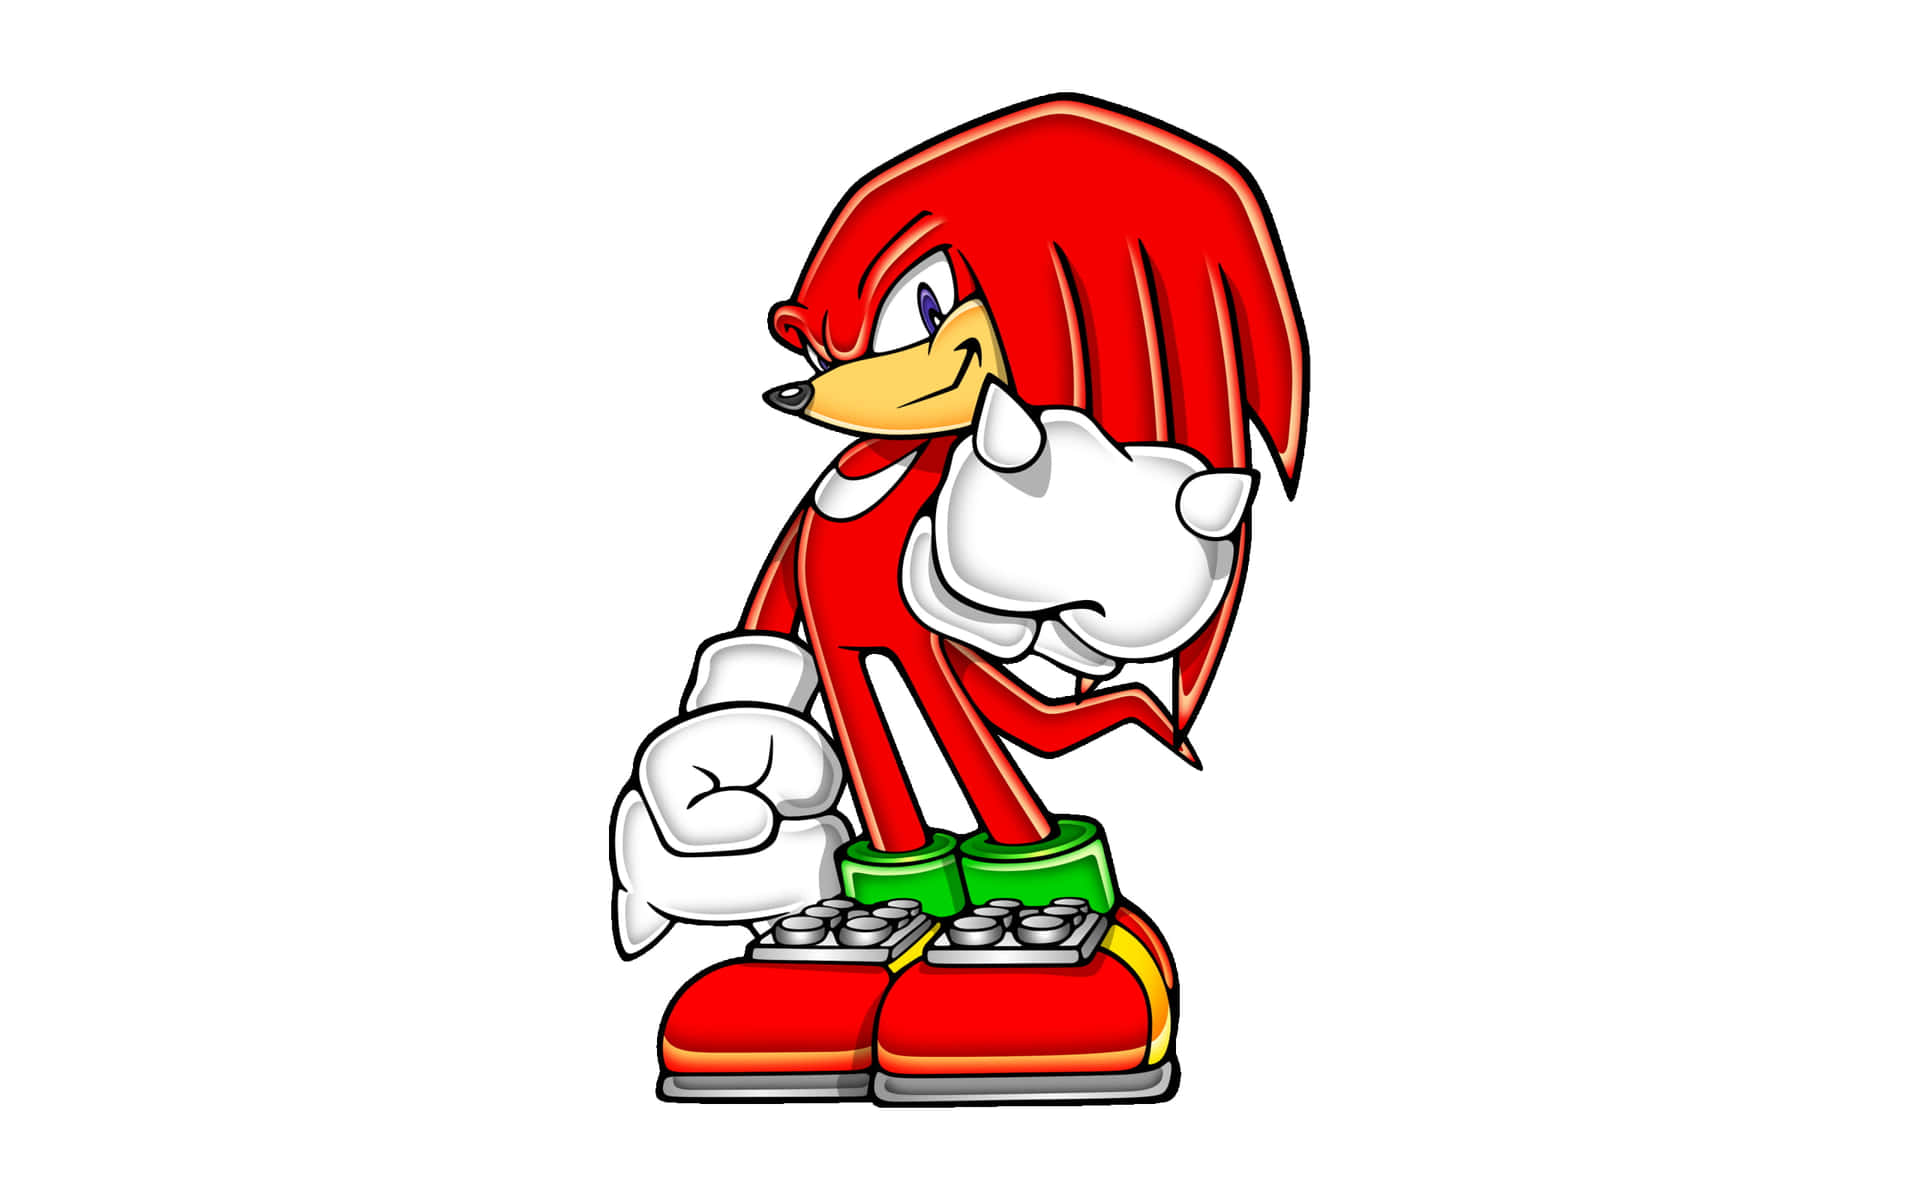 Check Out Knuckles, The Cheeky Echidna With Attitude! Wallpaper